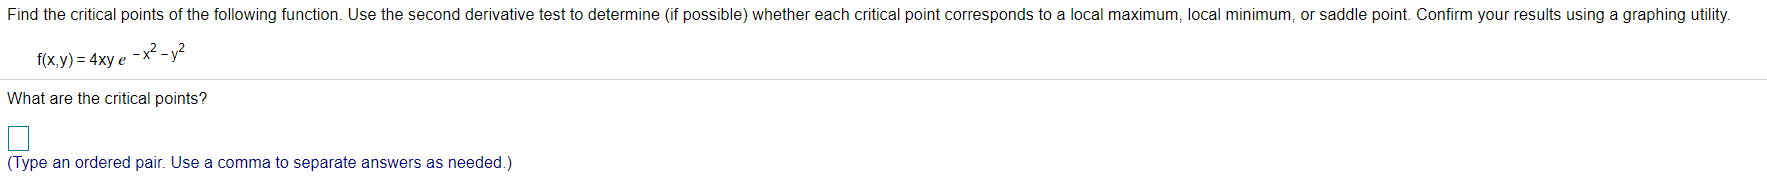 Find the critical points of the following function. Use the second derivative test to determine (if possible) whether each critical point corresponds to a local maximum, local minimum, or saddle point. Confirm your results using a graphing utility.
-x? - y²
f(x,y) = 4xy e
What are the critical points?
(Type an ordered pair. Use a comma to separate answers as needed.)
